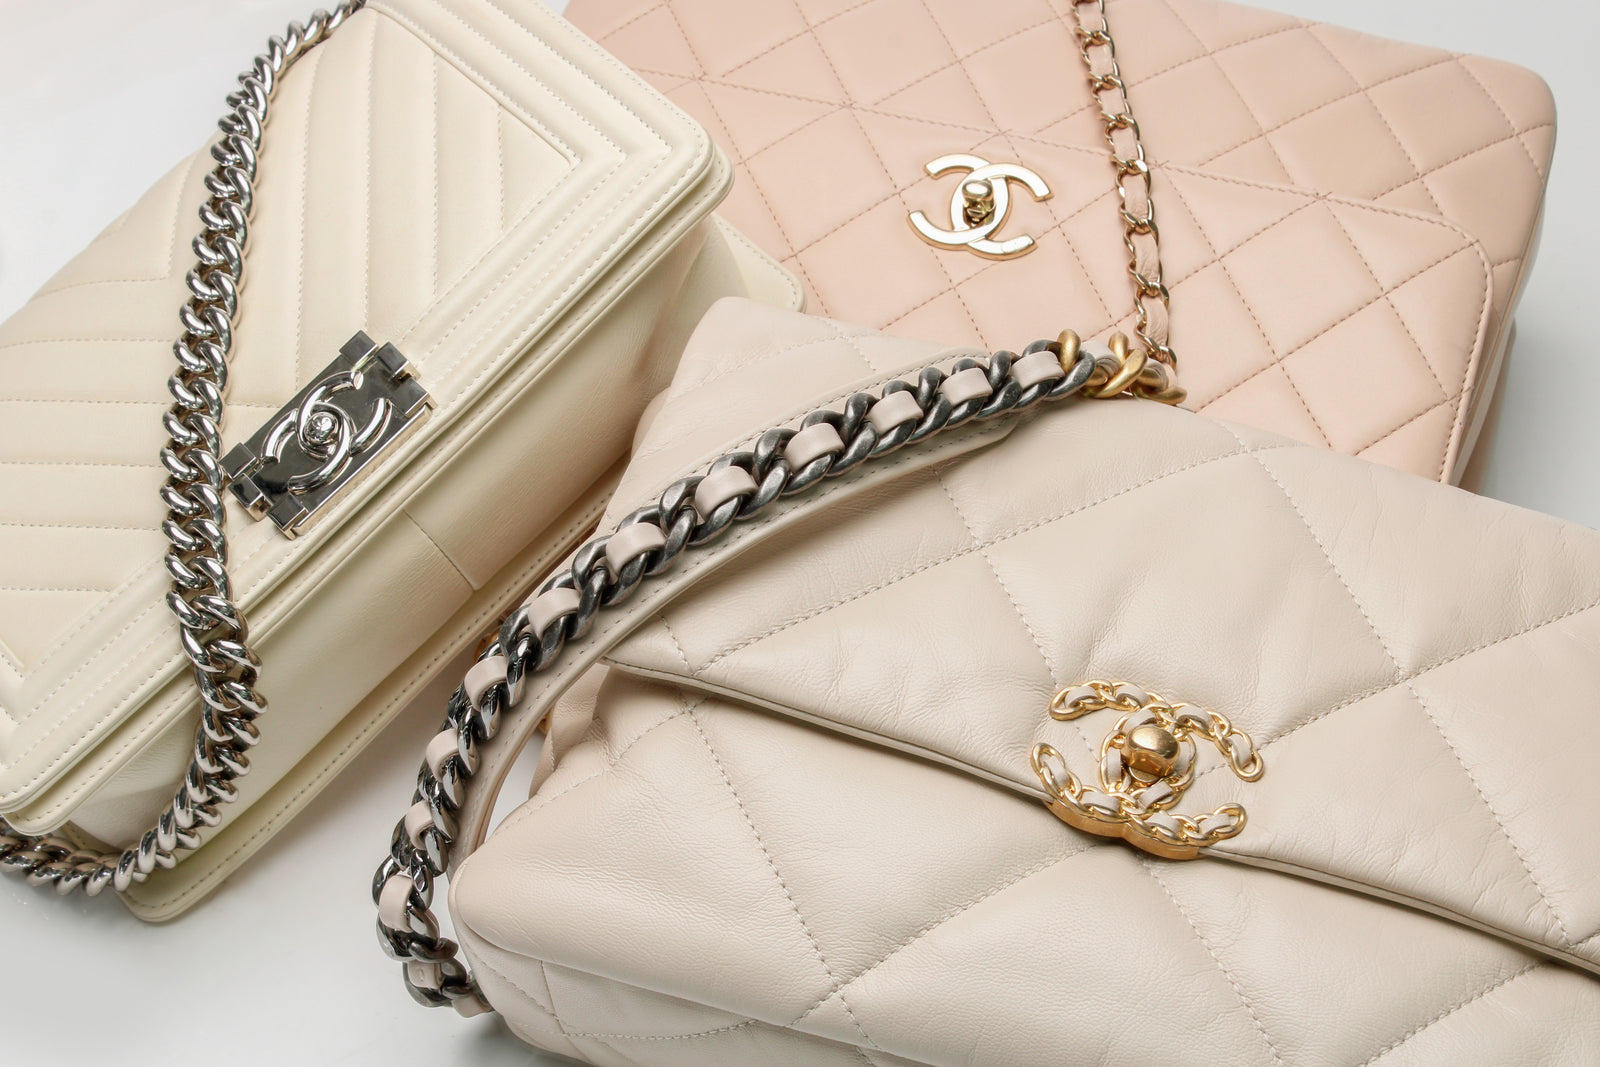 CHANEL CLUTCH – Only Authentics